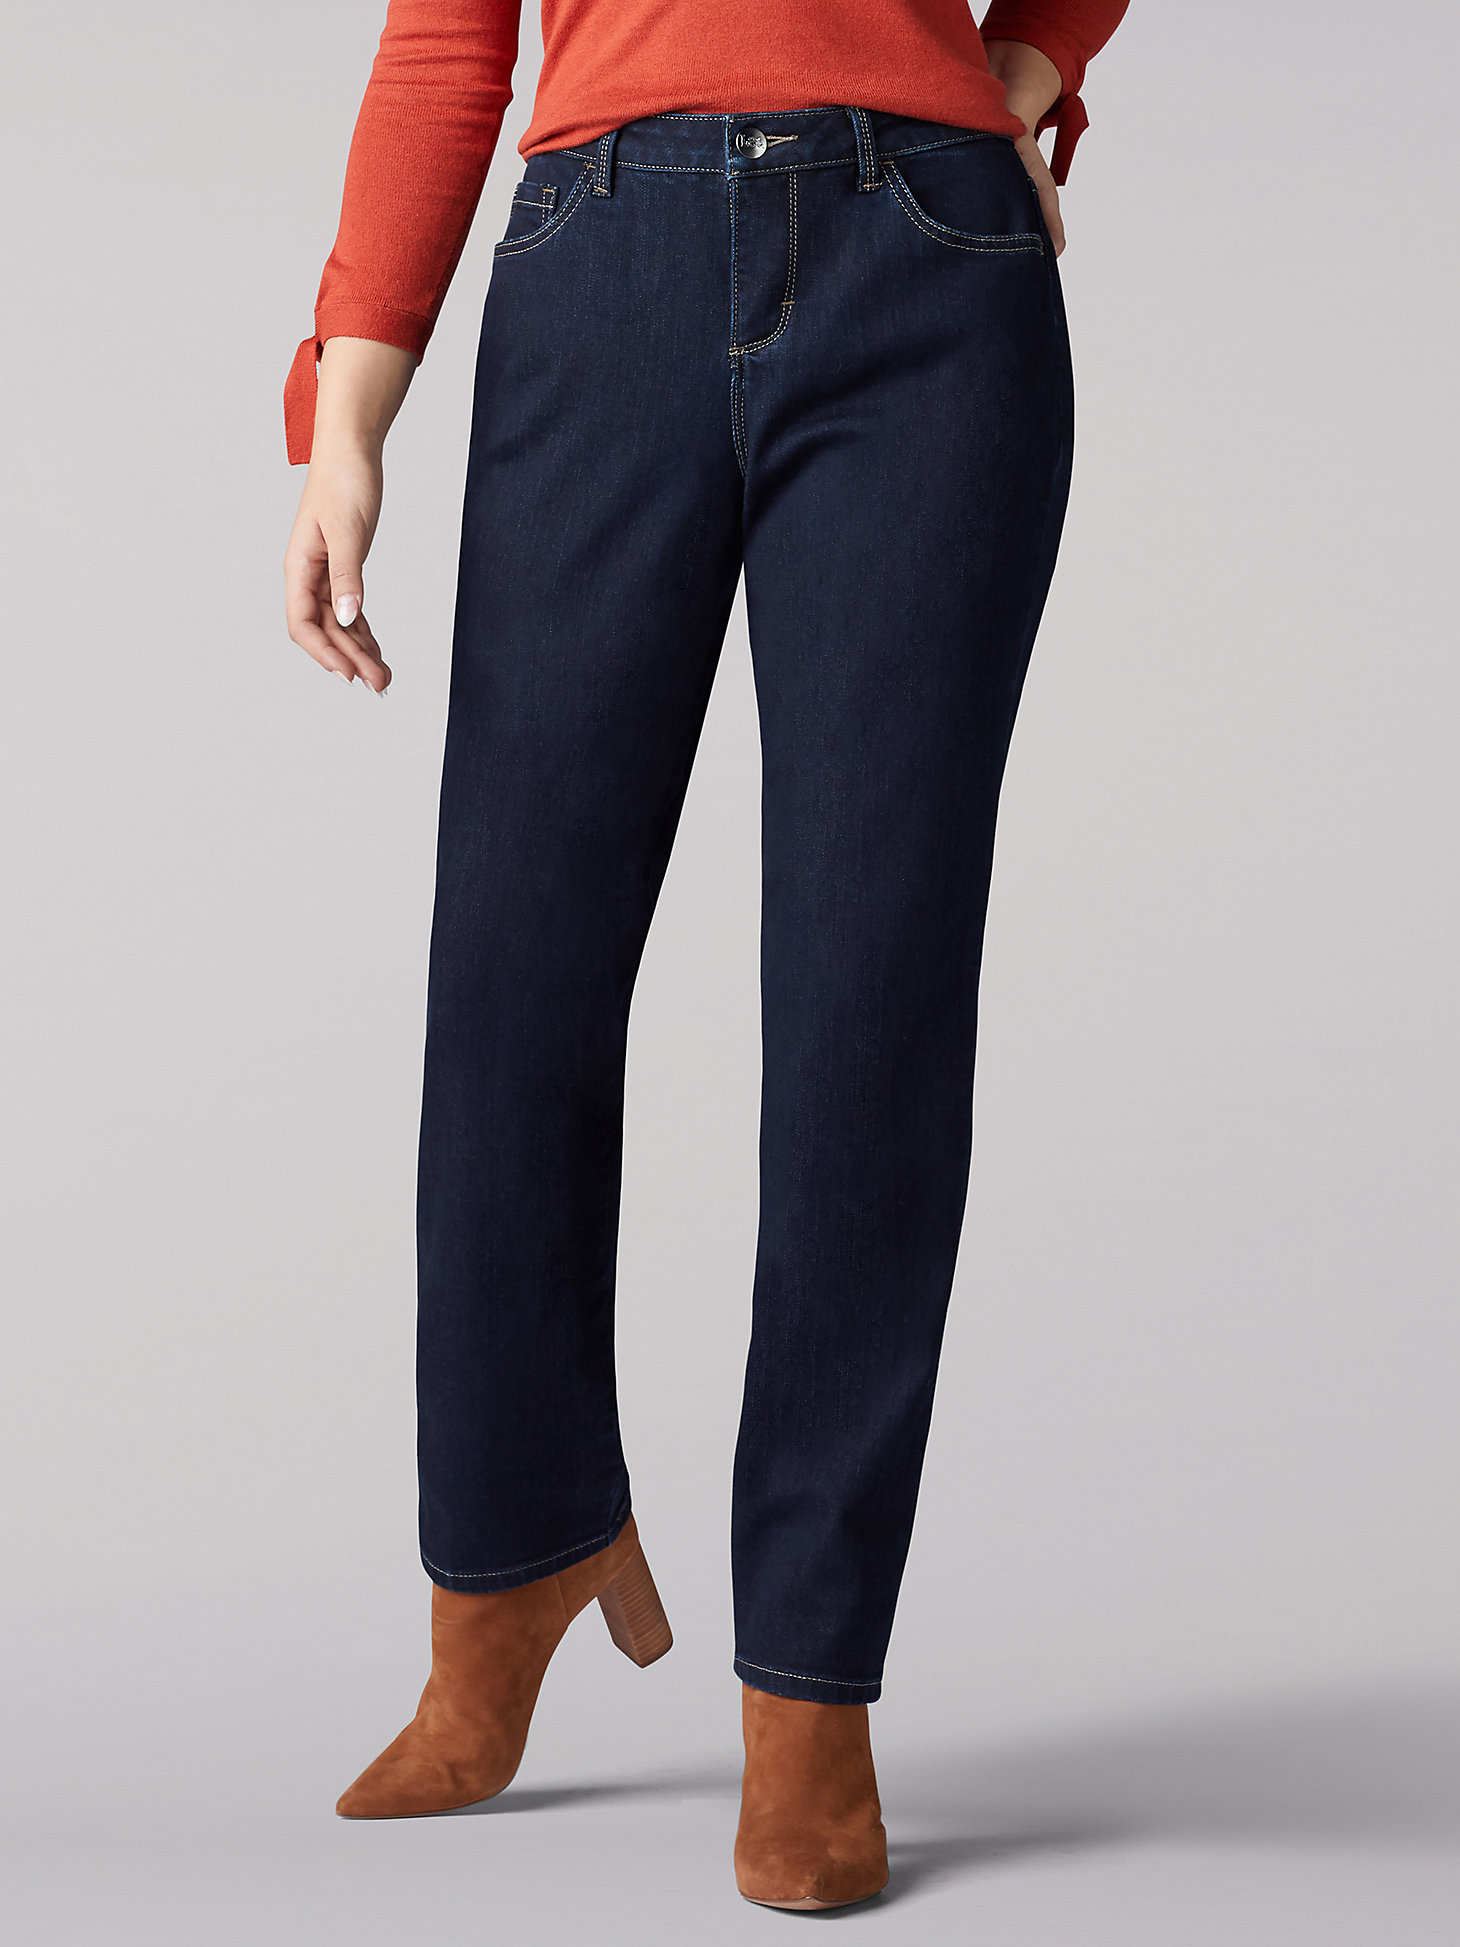 Women's Instantly Slims Relaxed Fit Straight Leg Jean (Petite) in Hertiage main view